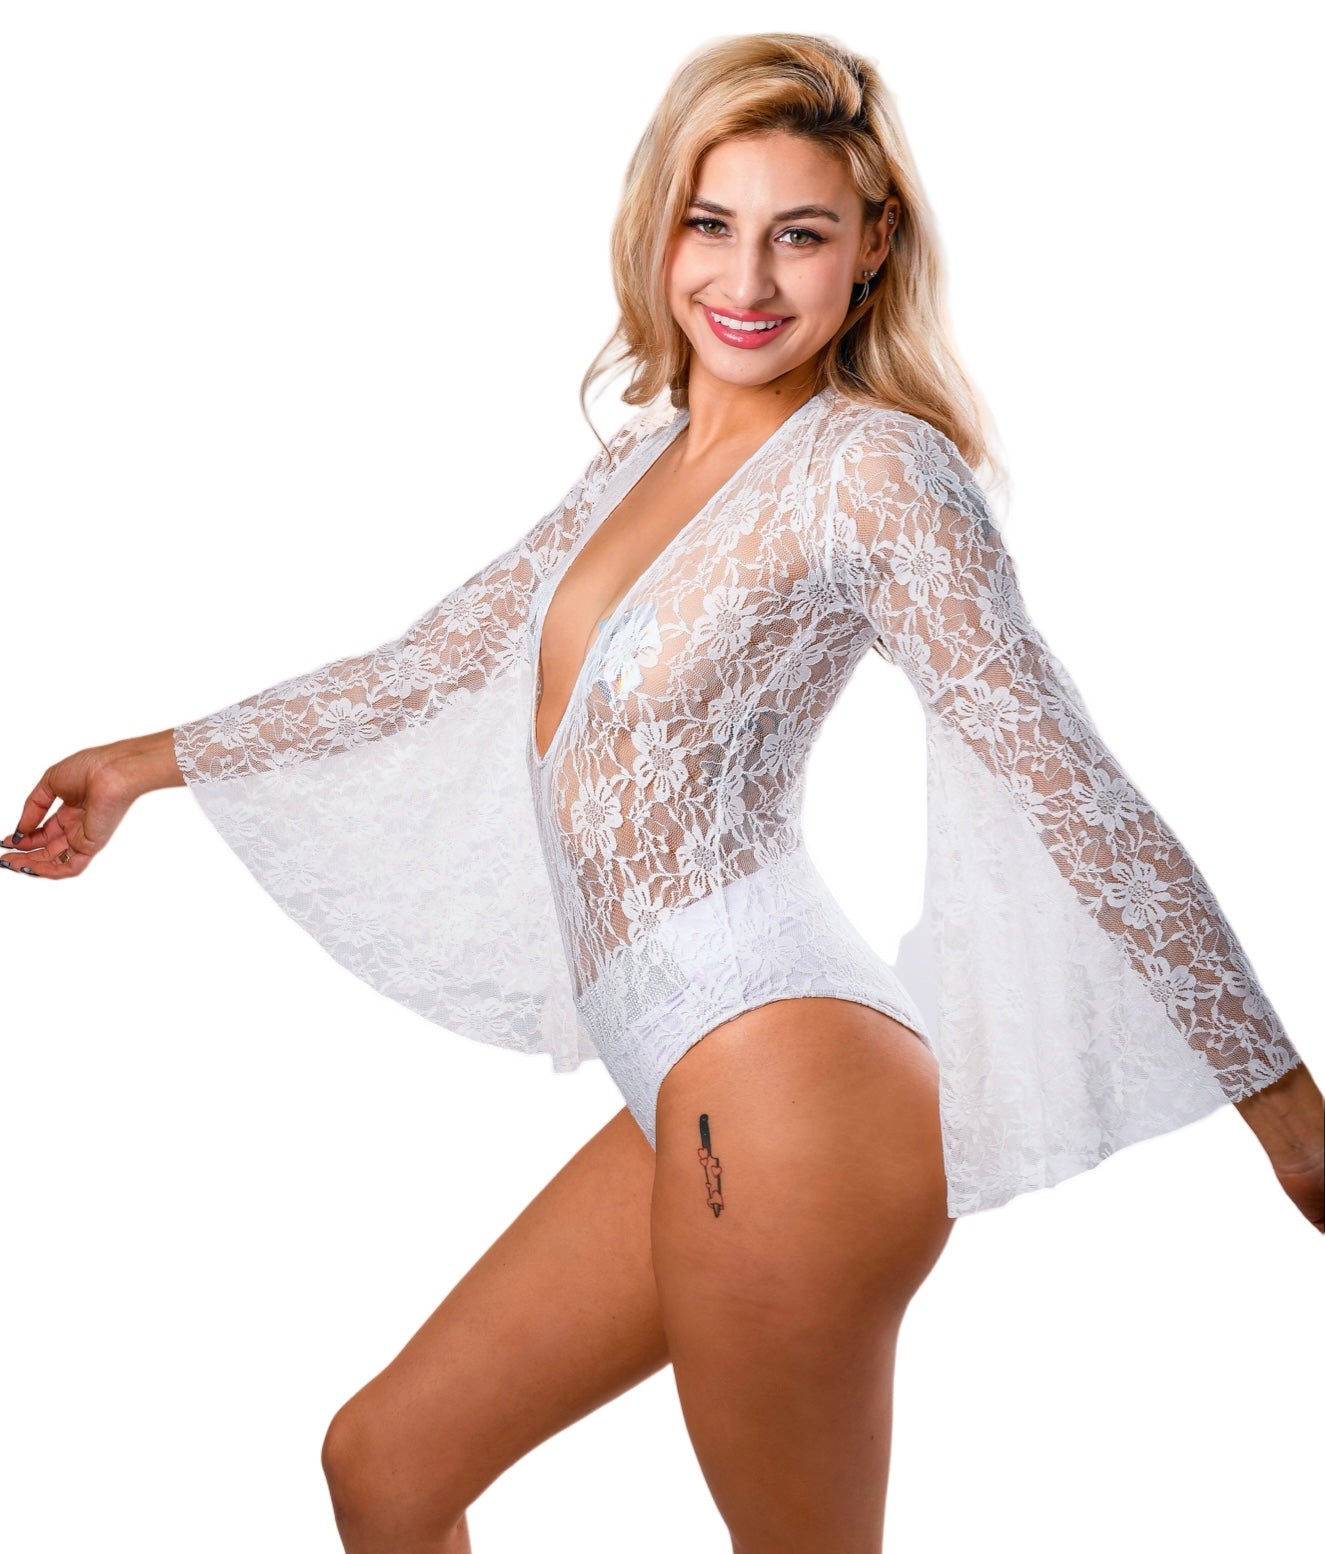 Bell Sleeve Bodysuit- White Lace Rave clothes,rave outfits,edc